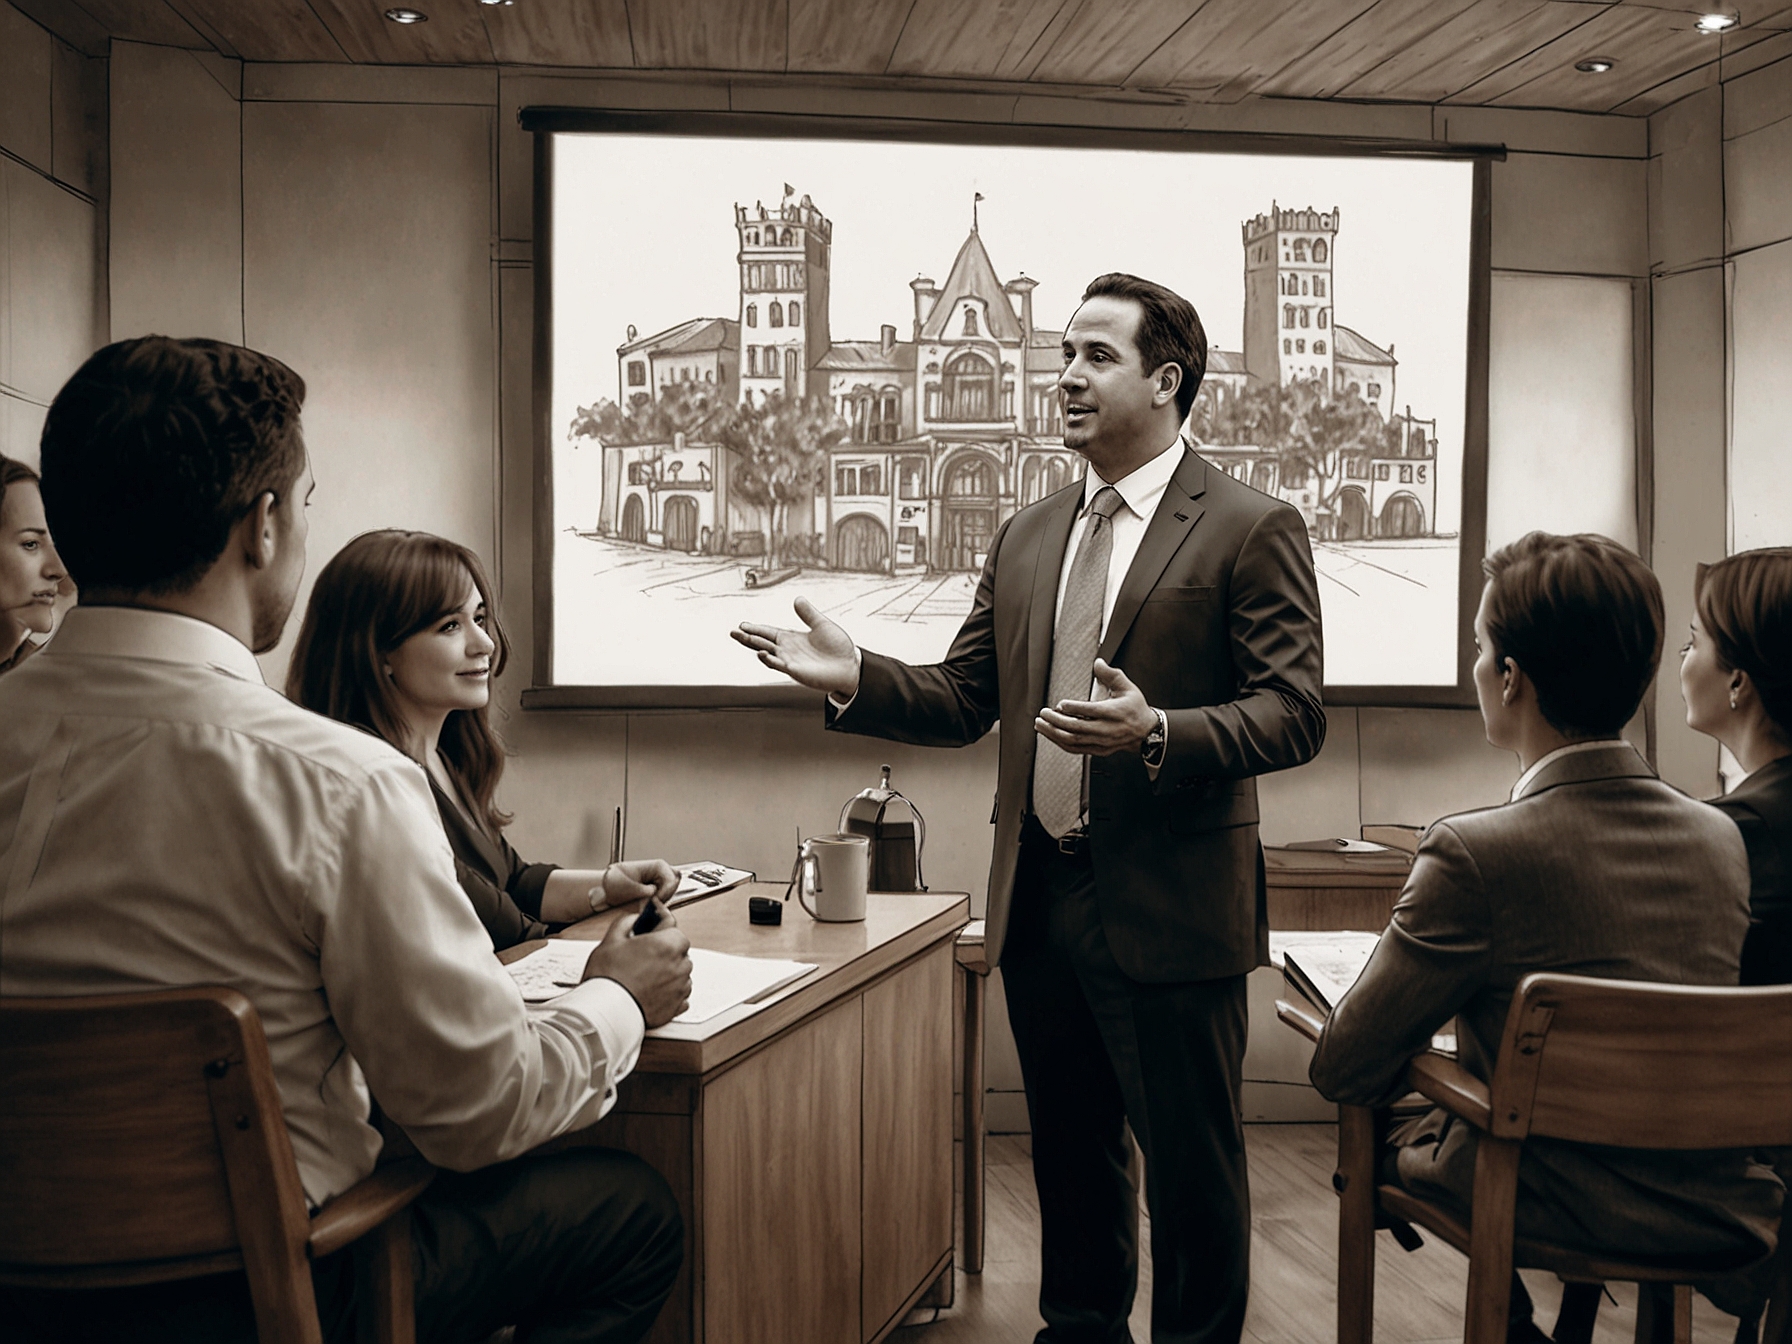 Image showing Joe La Rosa, CEO of La Rosa Holdings Corp., addressing new agents, highlighting the company’s commitment to support and innovative growth in the real estate industry.